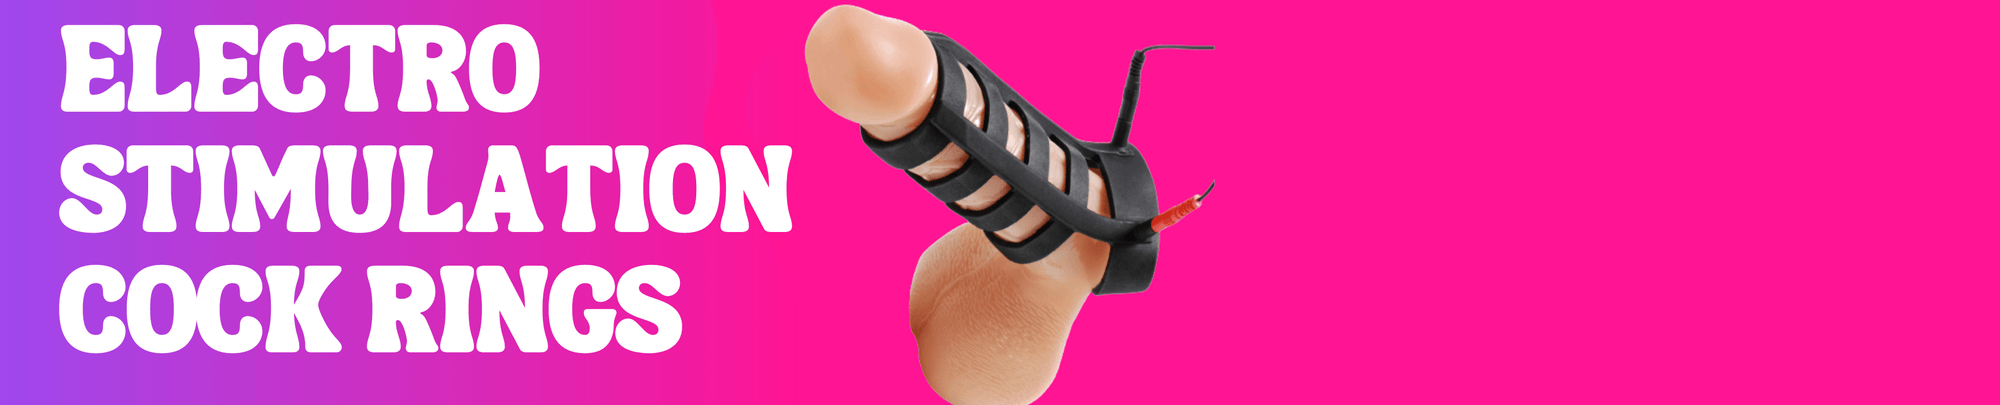 Electro Stimulation Cock Rings